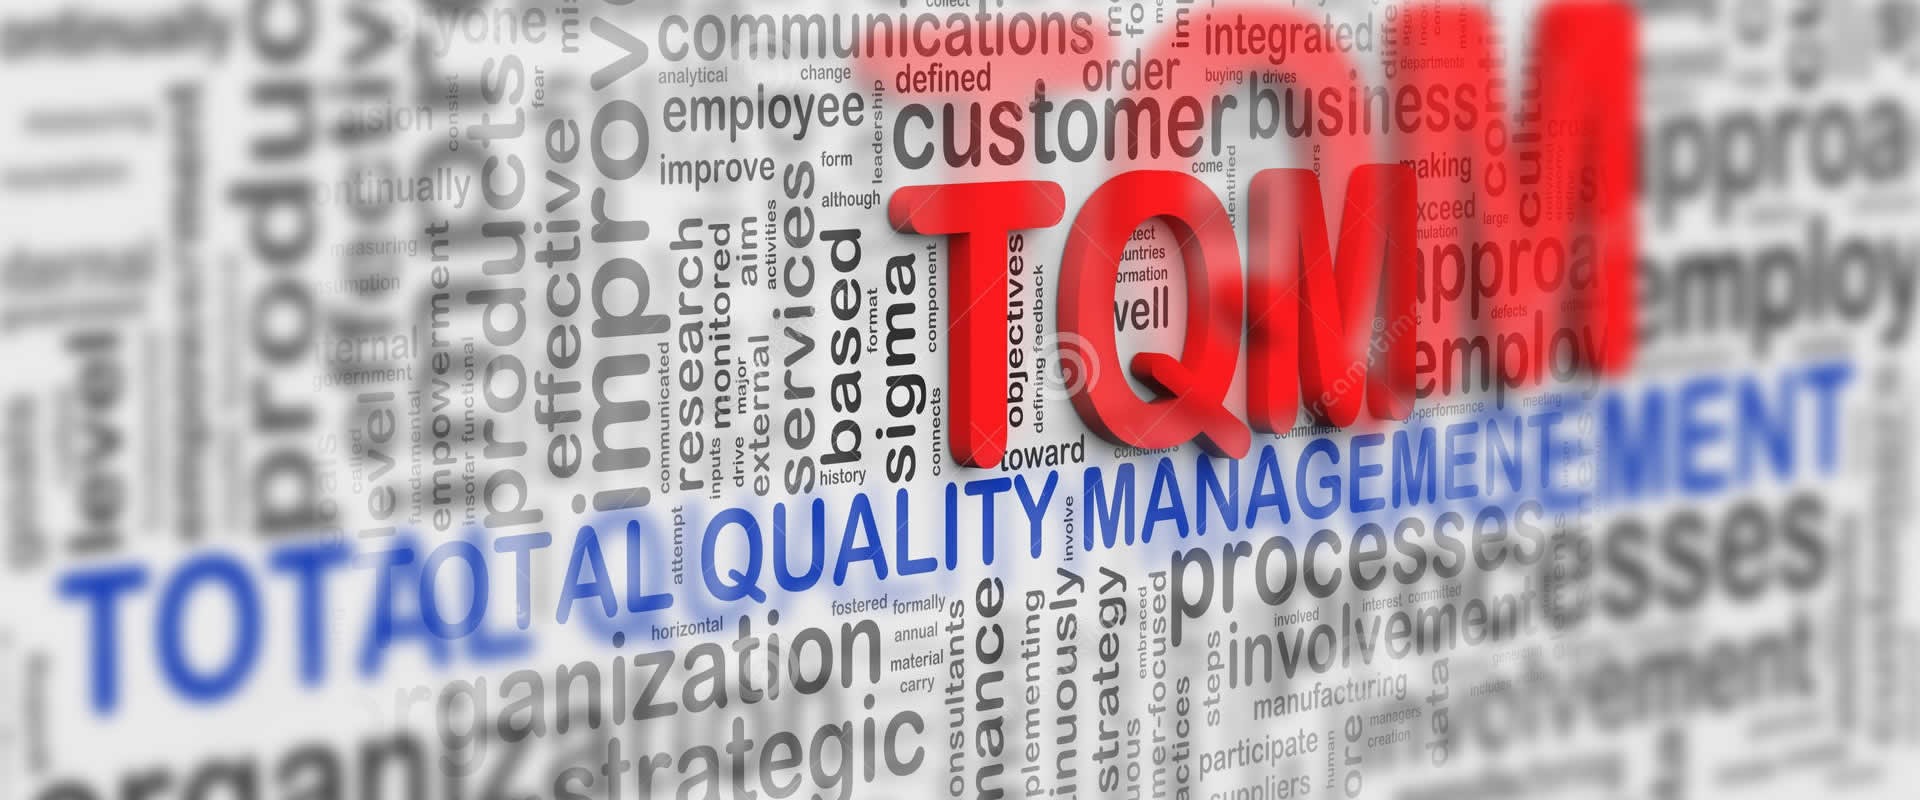 Total Quality Management'